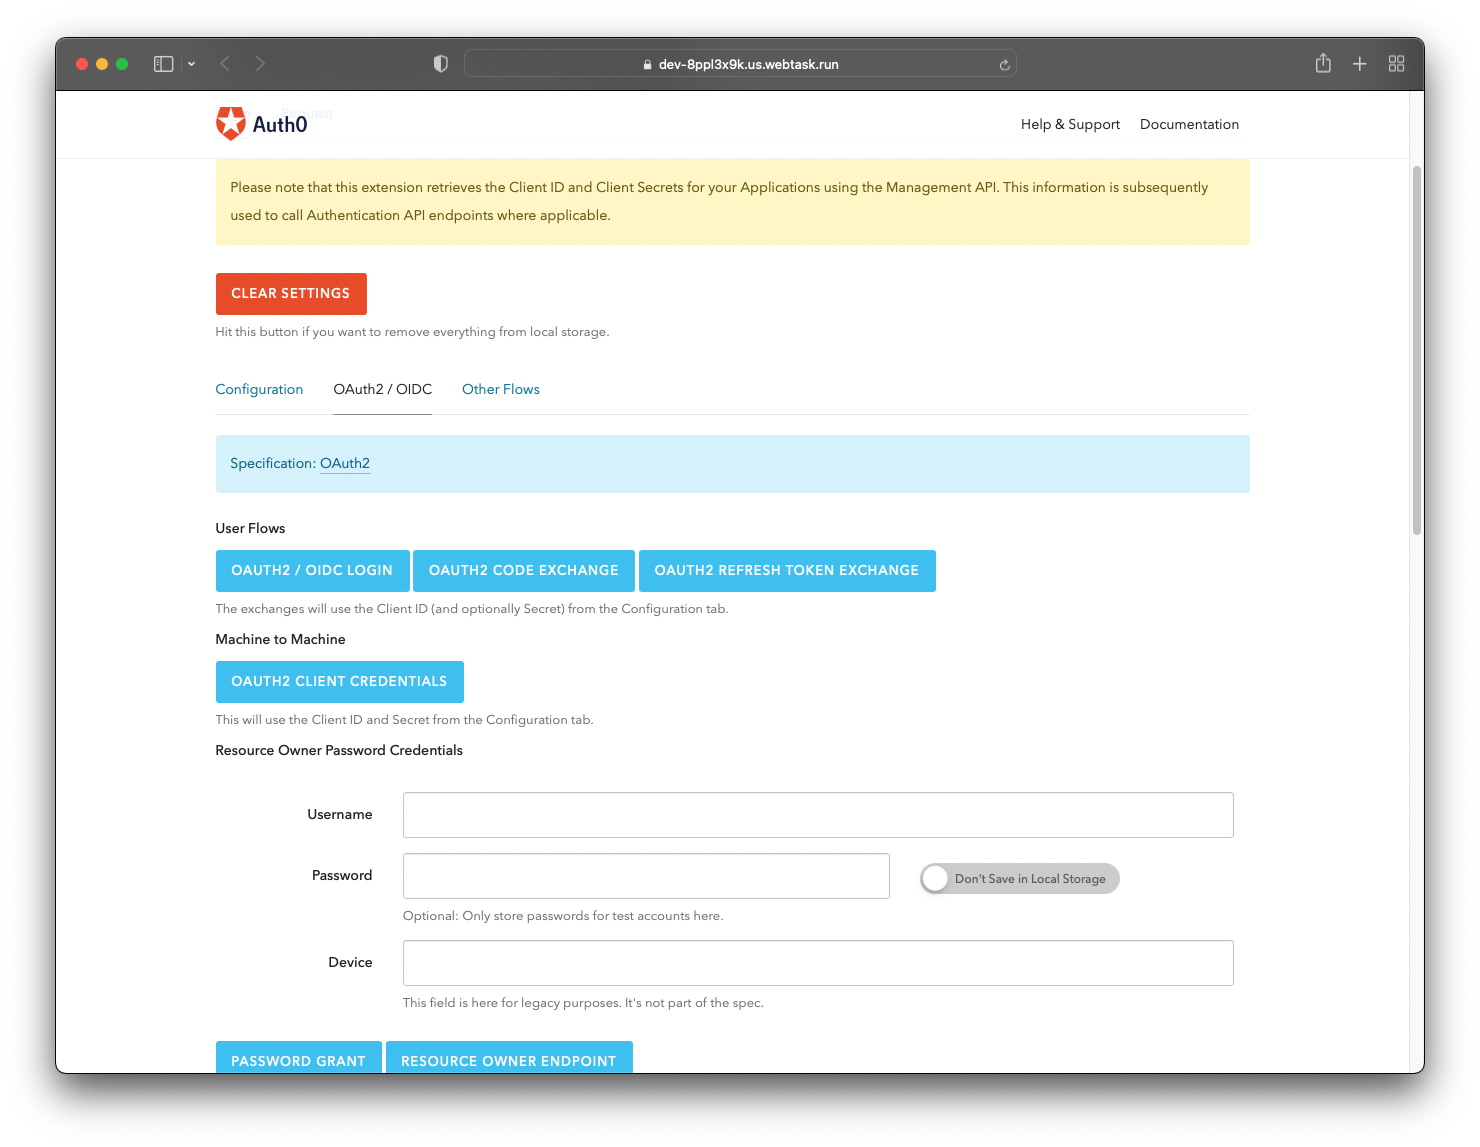 Auth0 Test OAUTH2/OIDC LOGIN